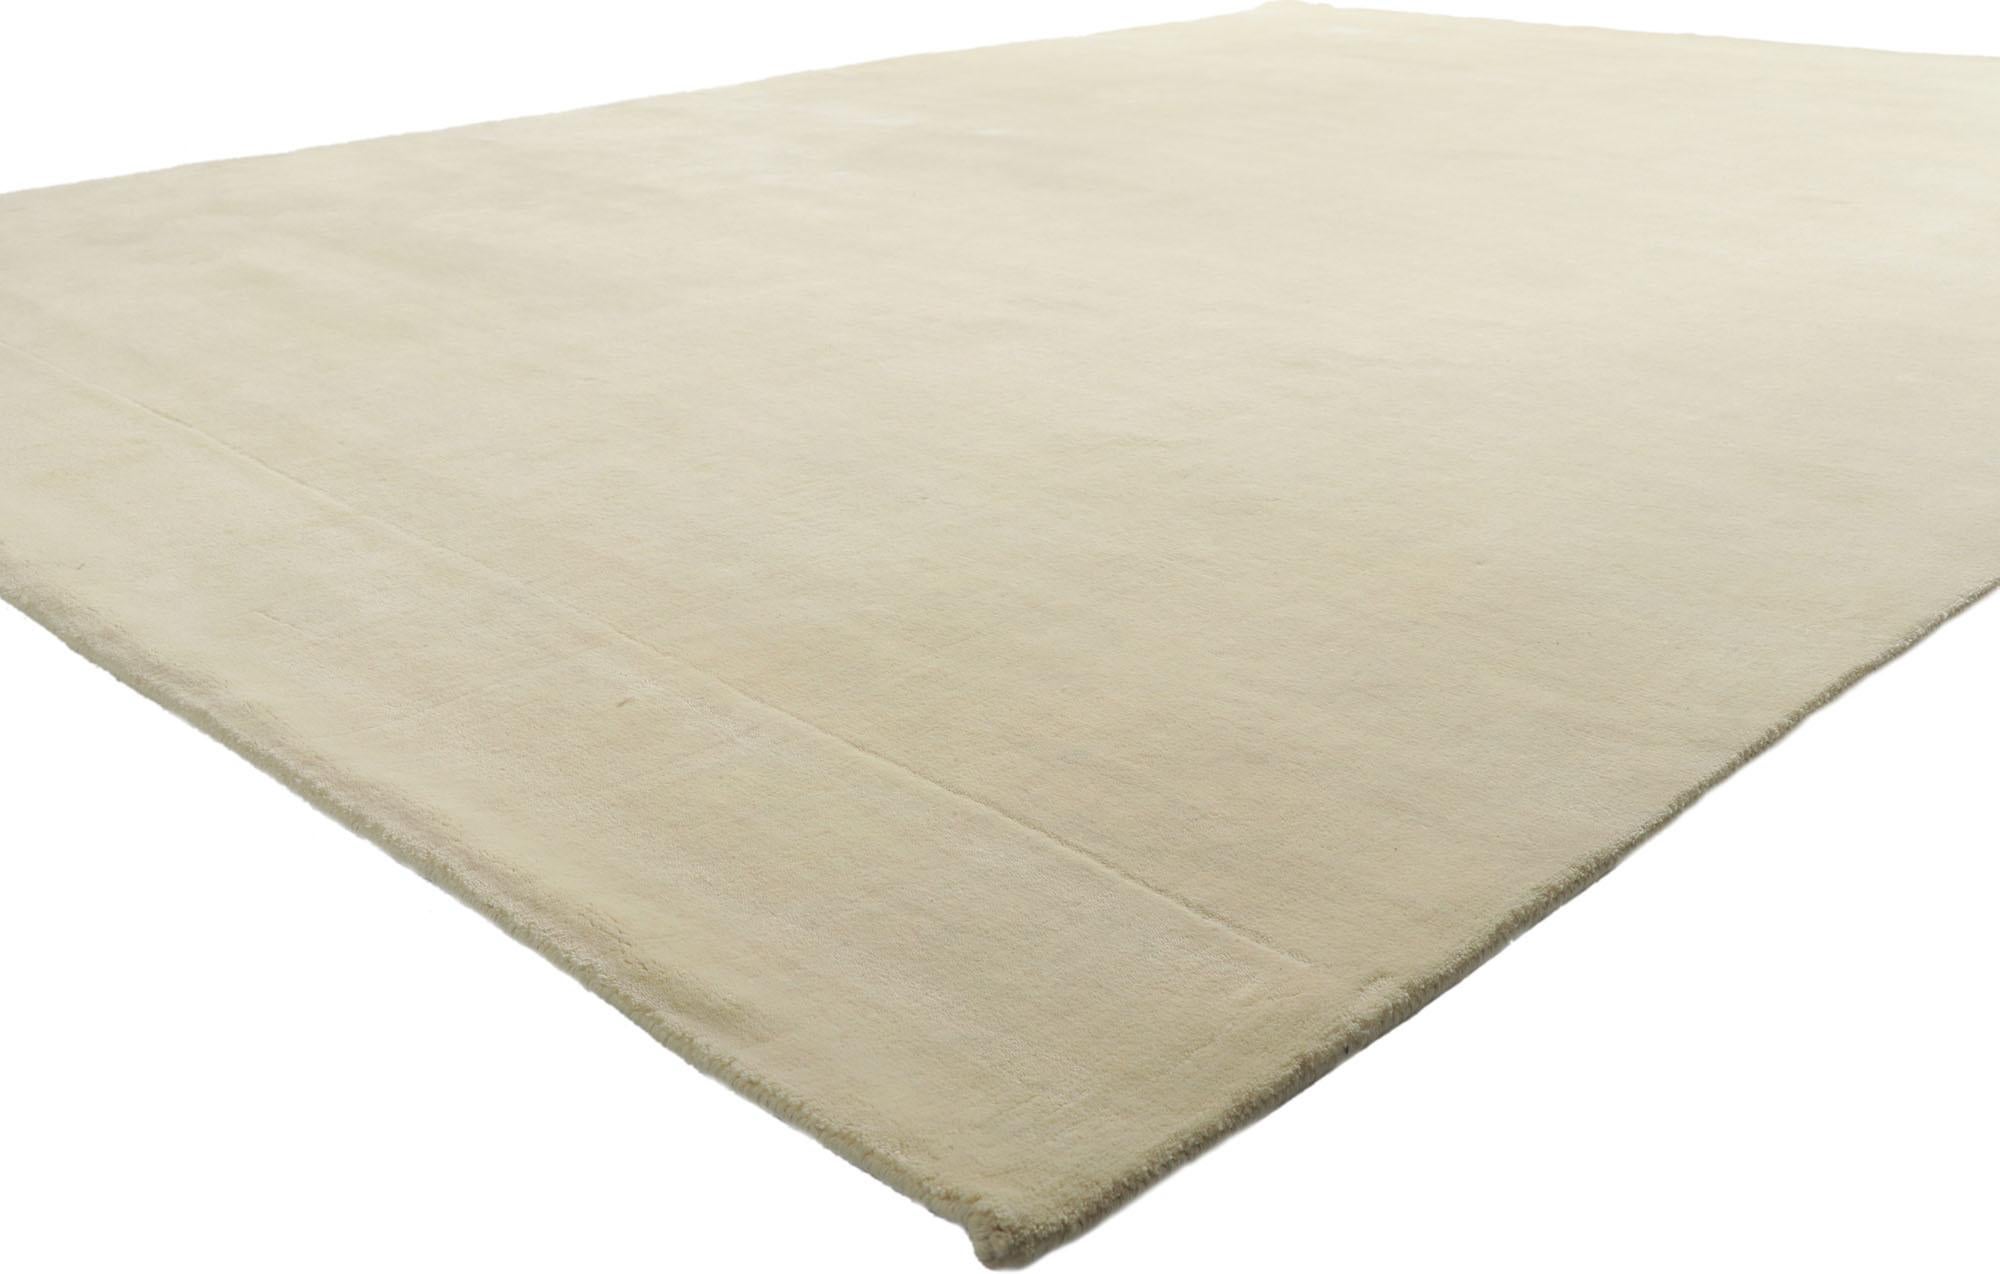 30756 New Contemporary Ivory Rug with Minimalist Style, 08'11 x 11'11. Enveloped in a captivating realm of contemporary elegance and subtle minimalism, this hand-loomed wool rug hails from the artisanal looms of modern India. Its essence seamlessly